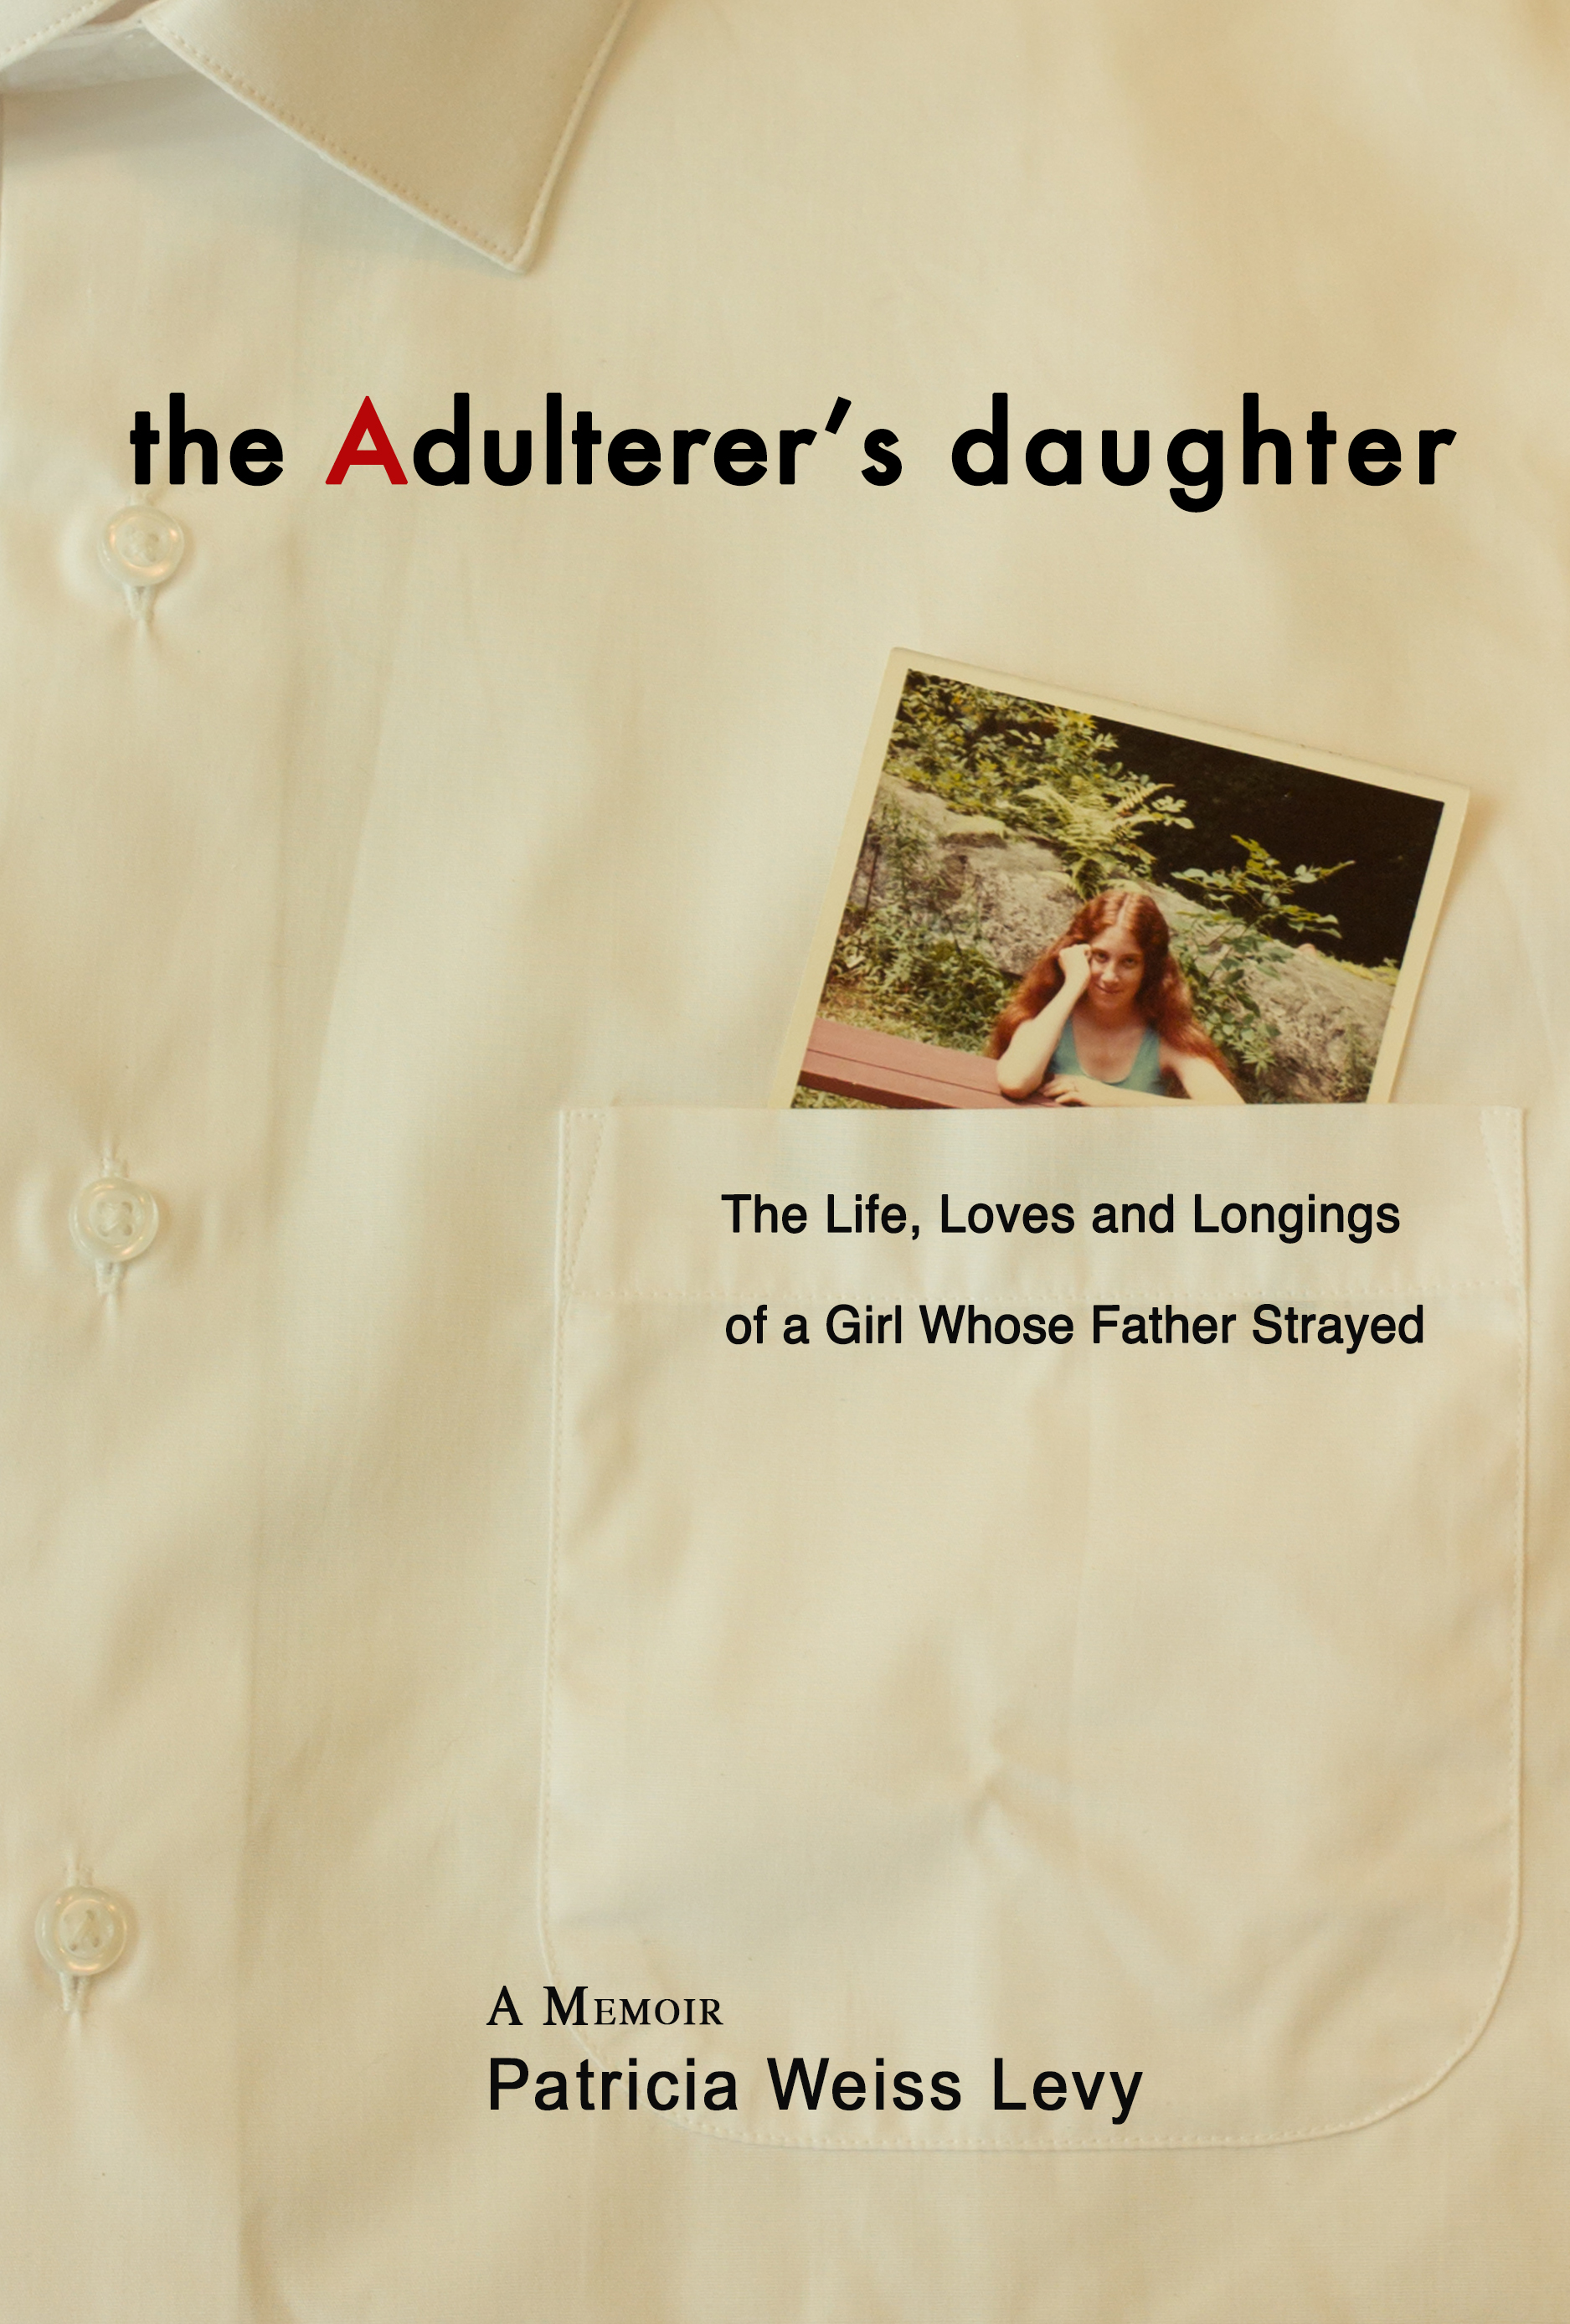 The Adulterer's Daughter by Patricia Weiss Levy.jpg